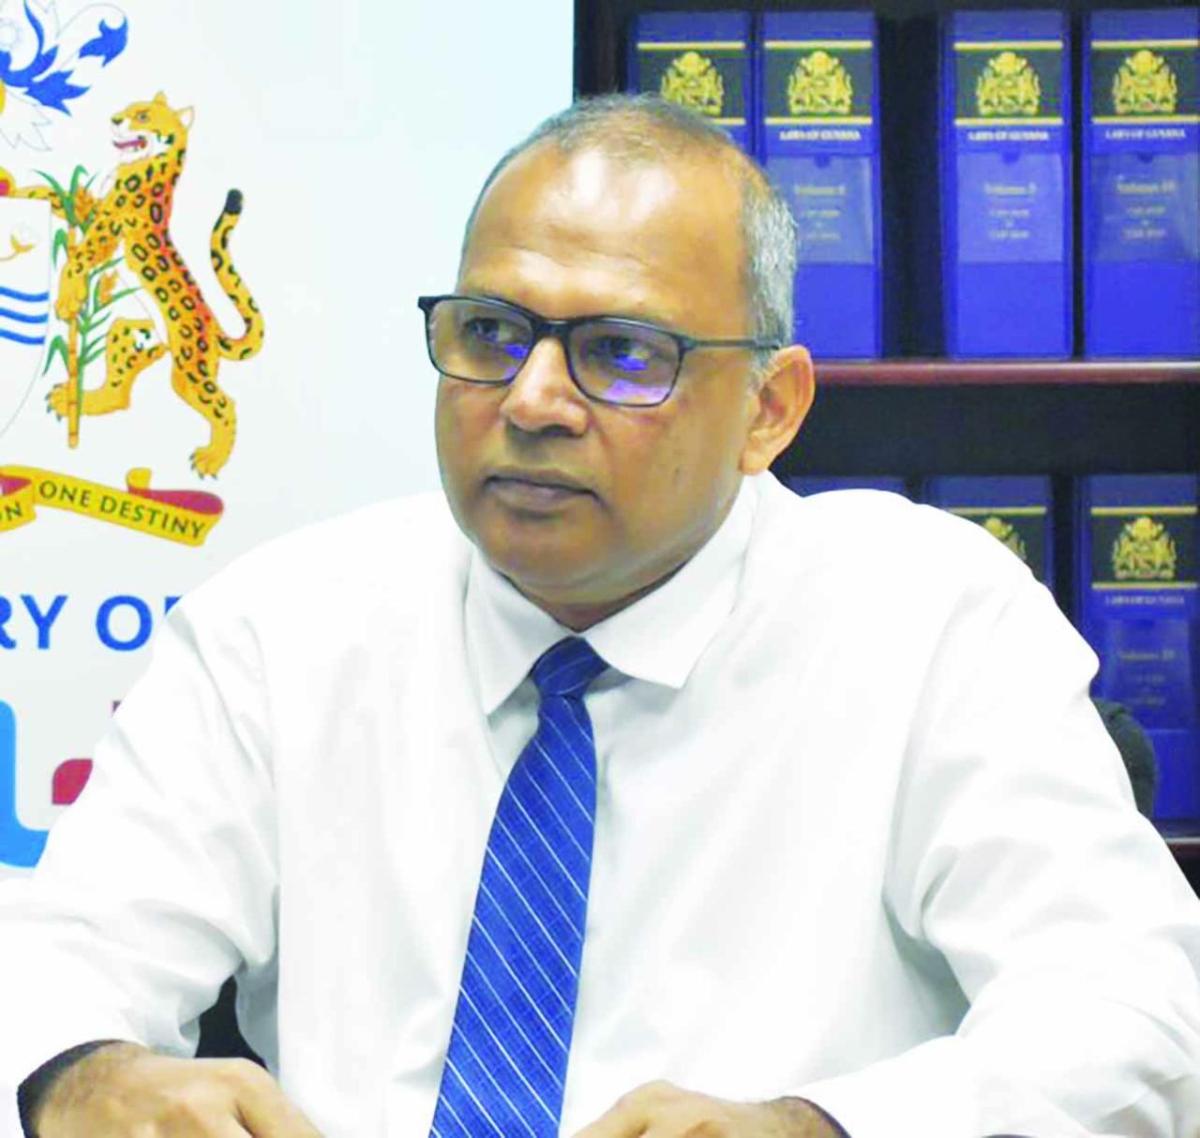 Dr Anthony urges citizens to take HPV to reduce risk of cervical cancer, other diseases - Guyana Times